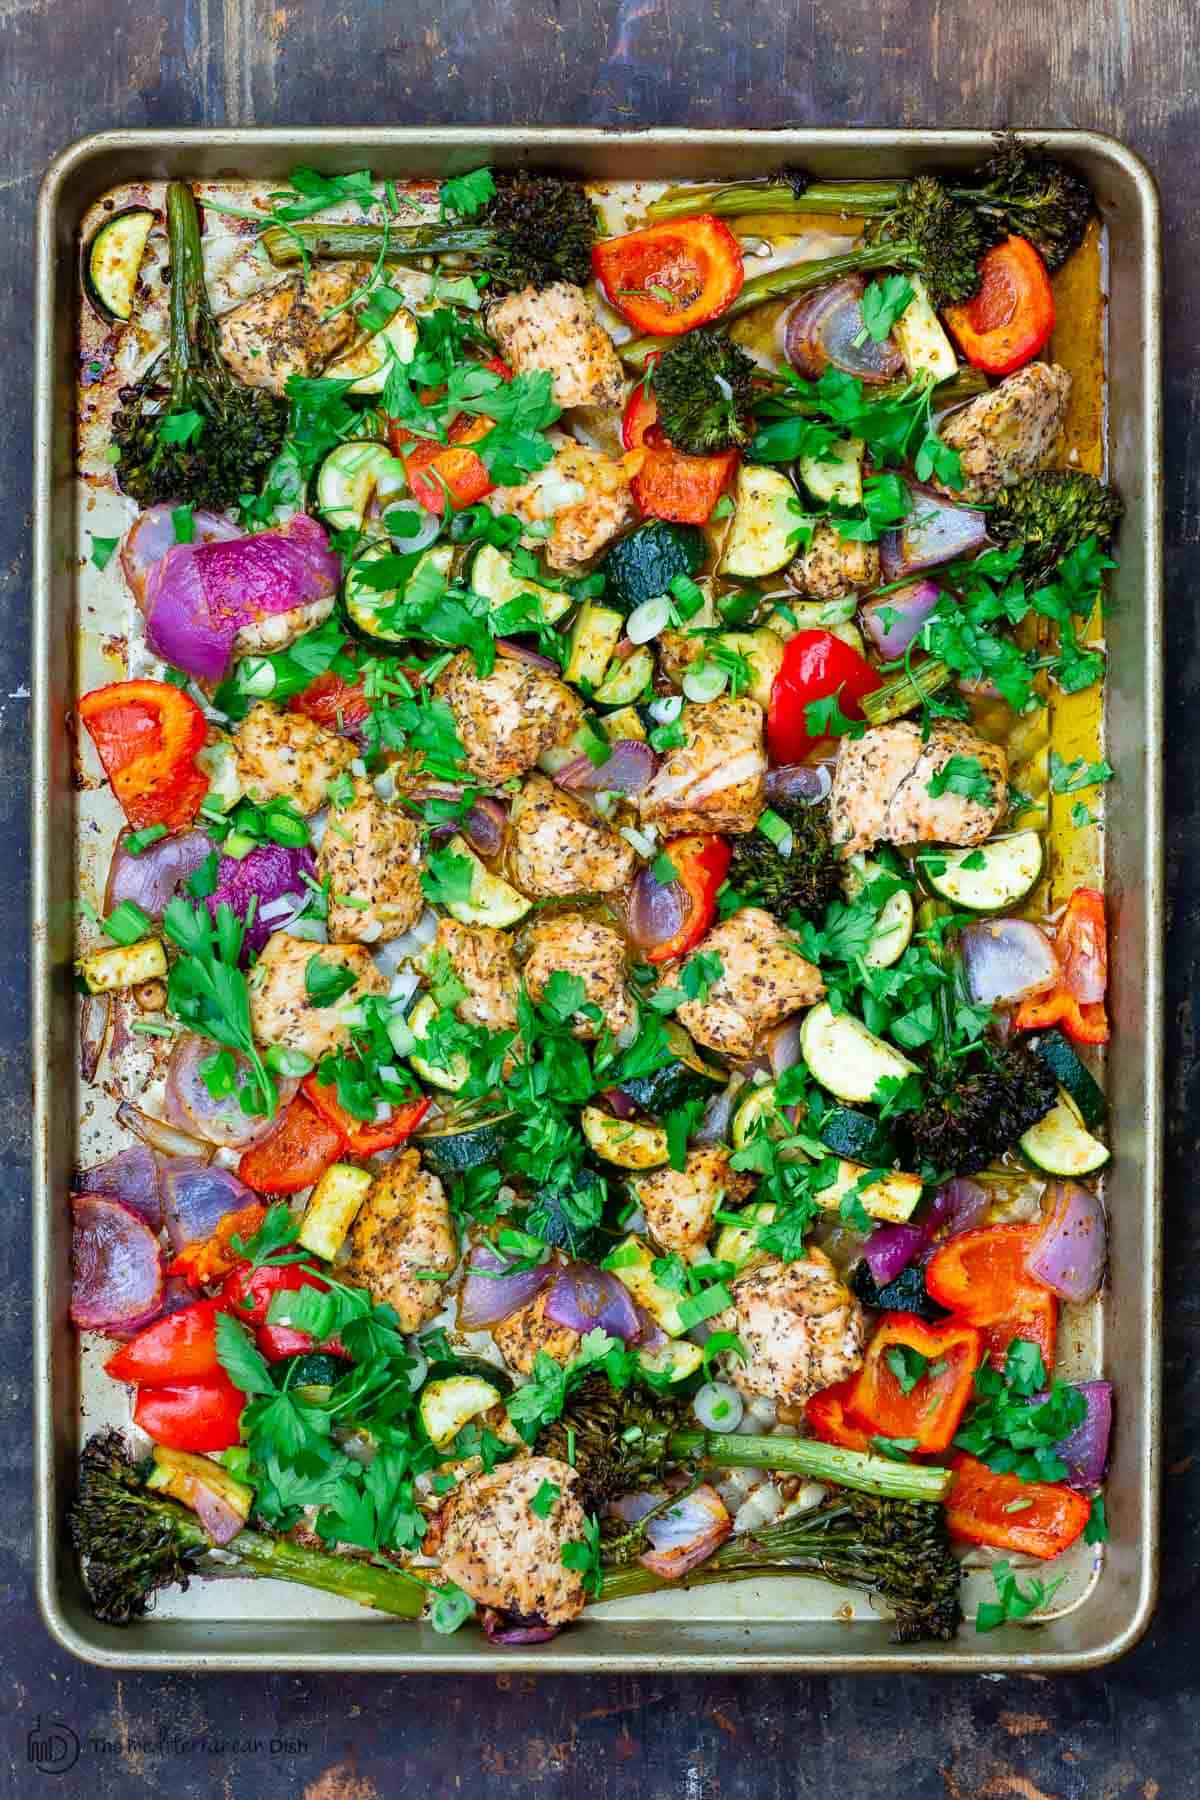 Baked chicken and vegetables on a sheet pan